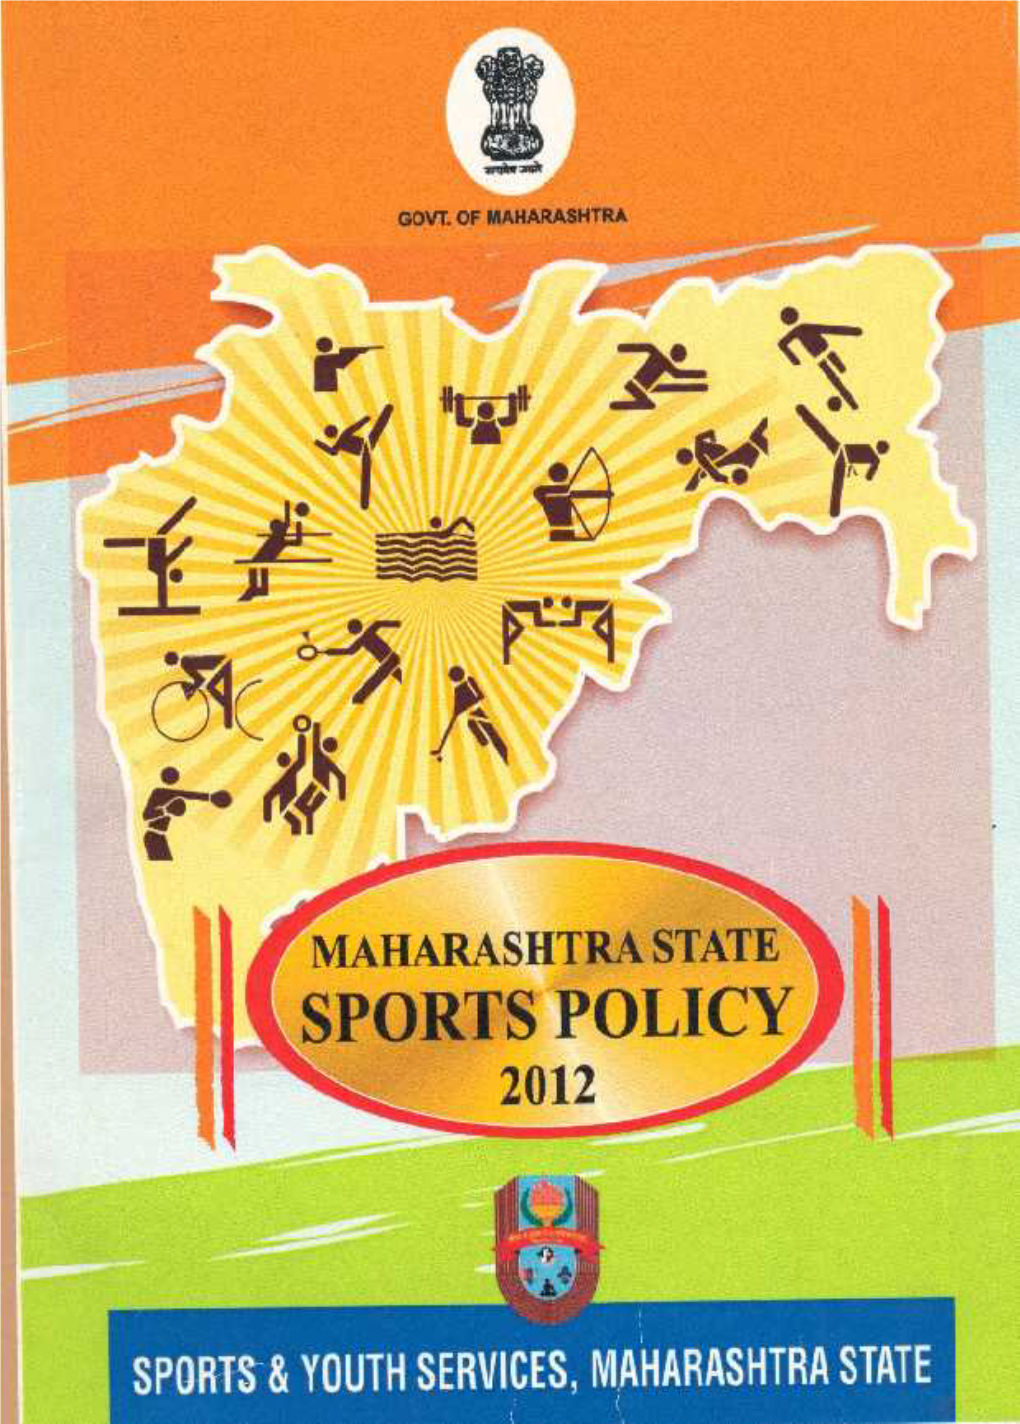 Sport Policy